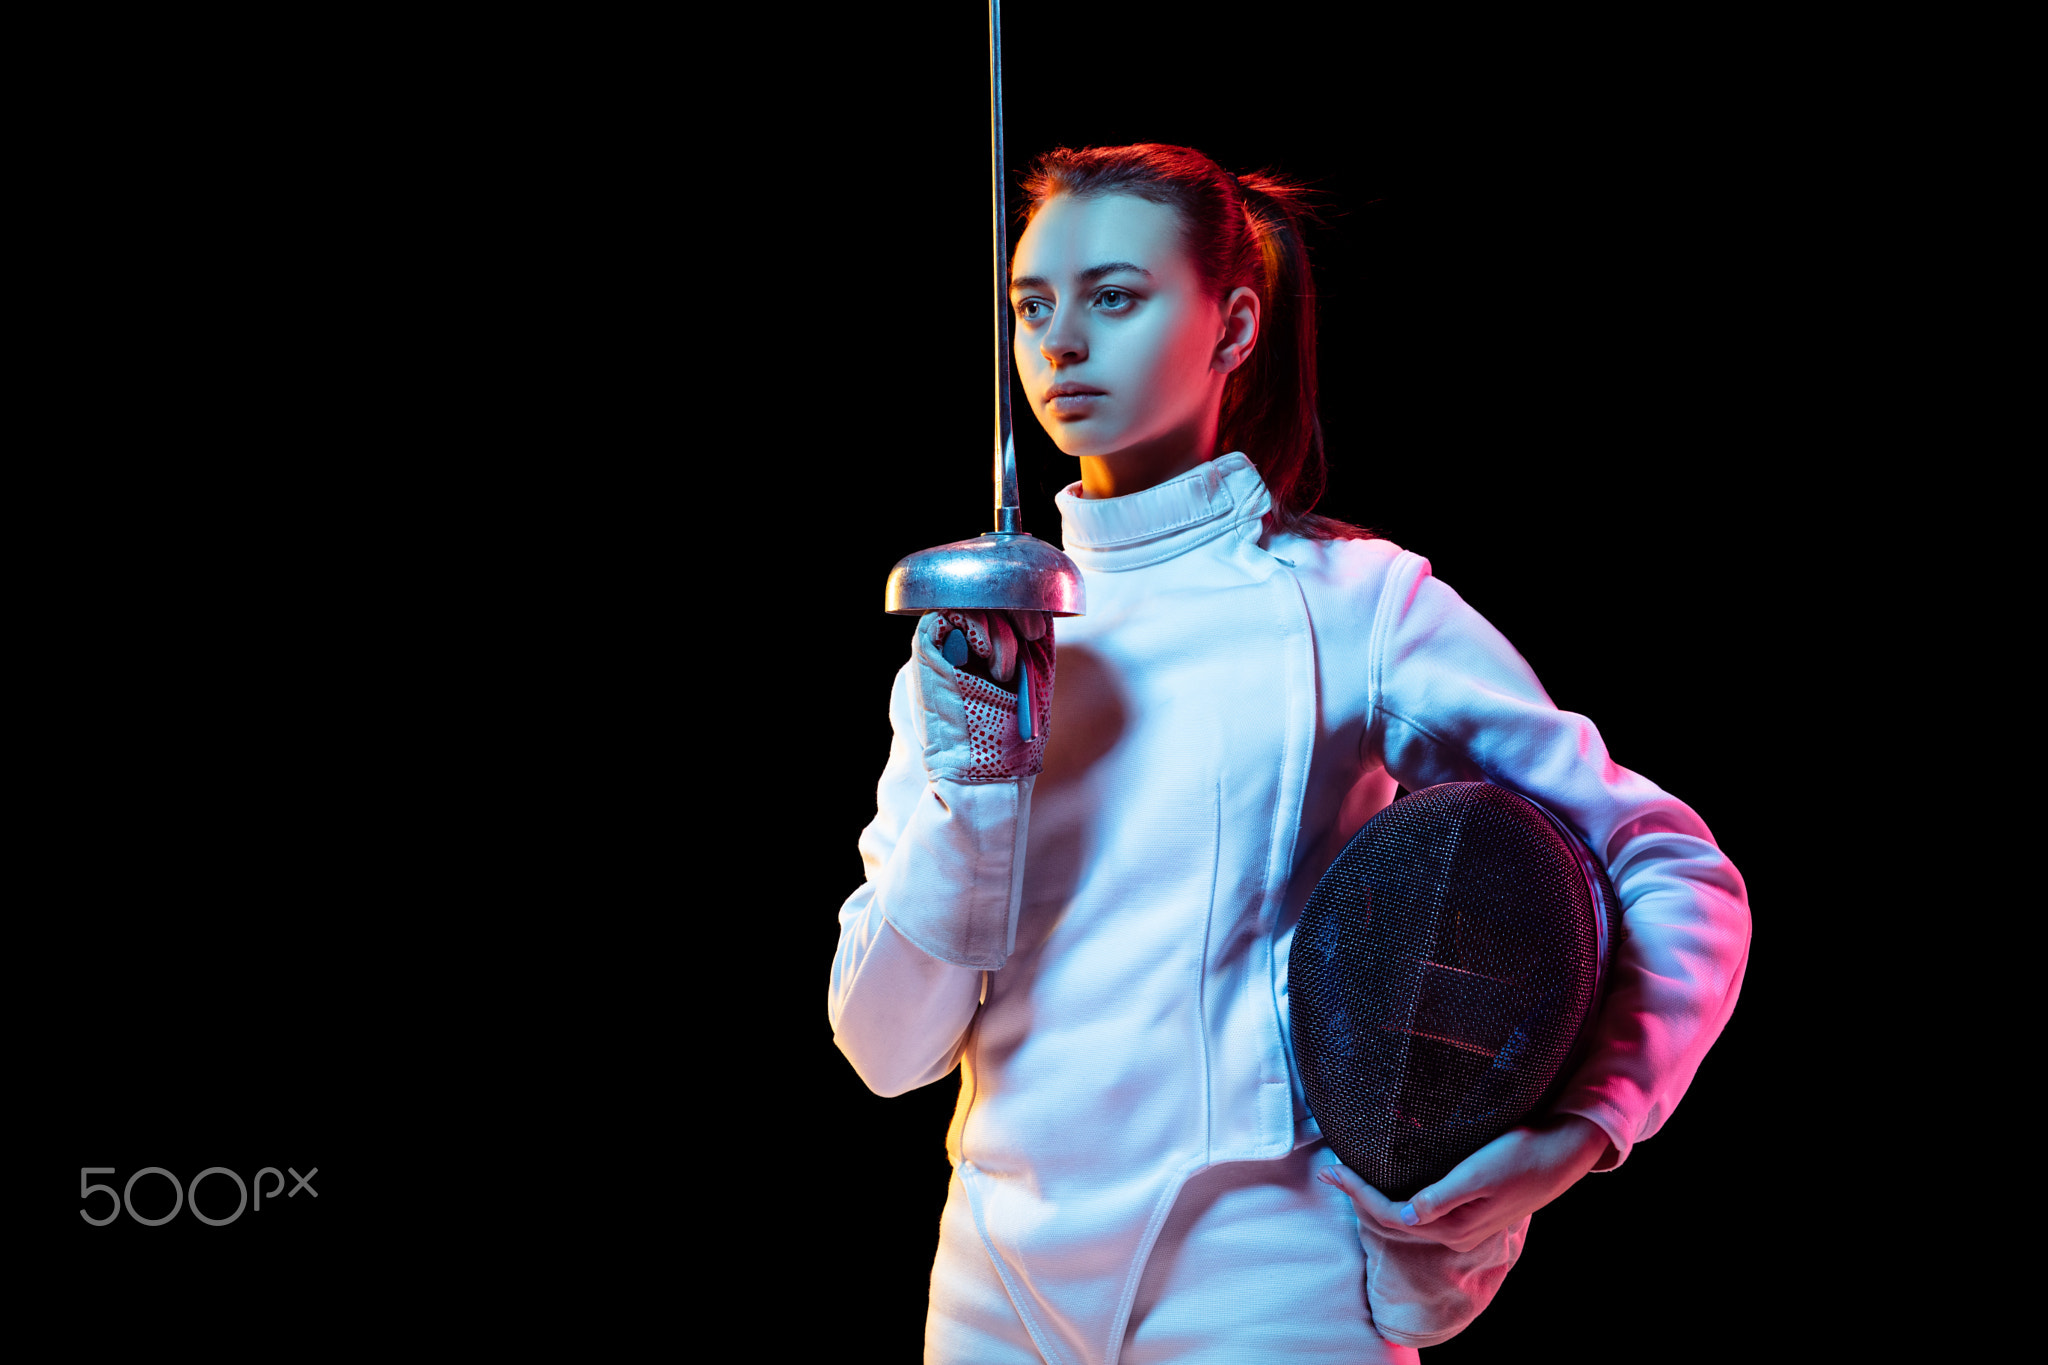 Teen girl in fencing costume with sword in hand isolated on black